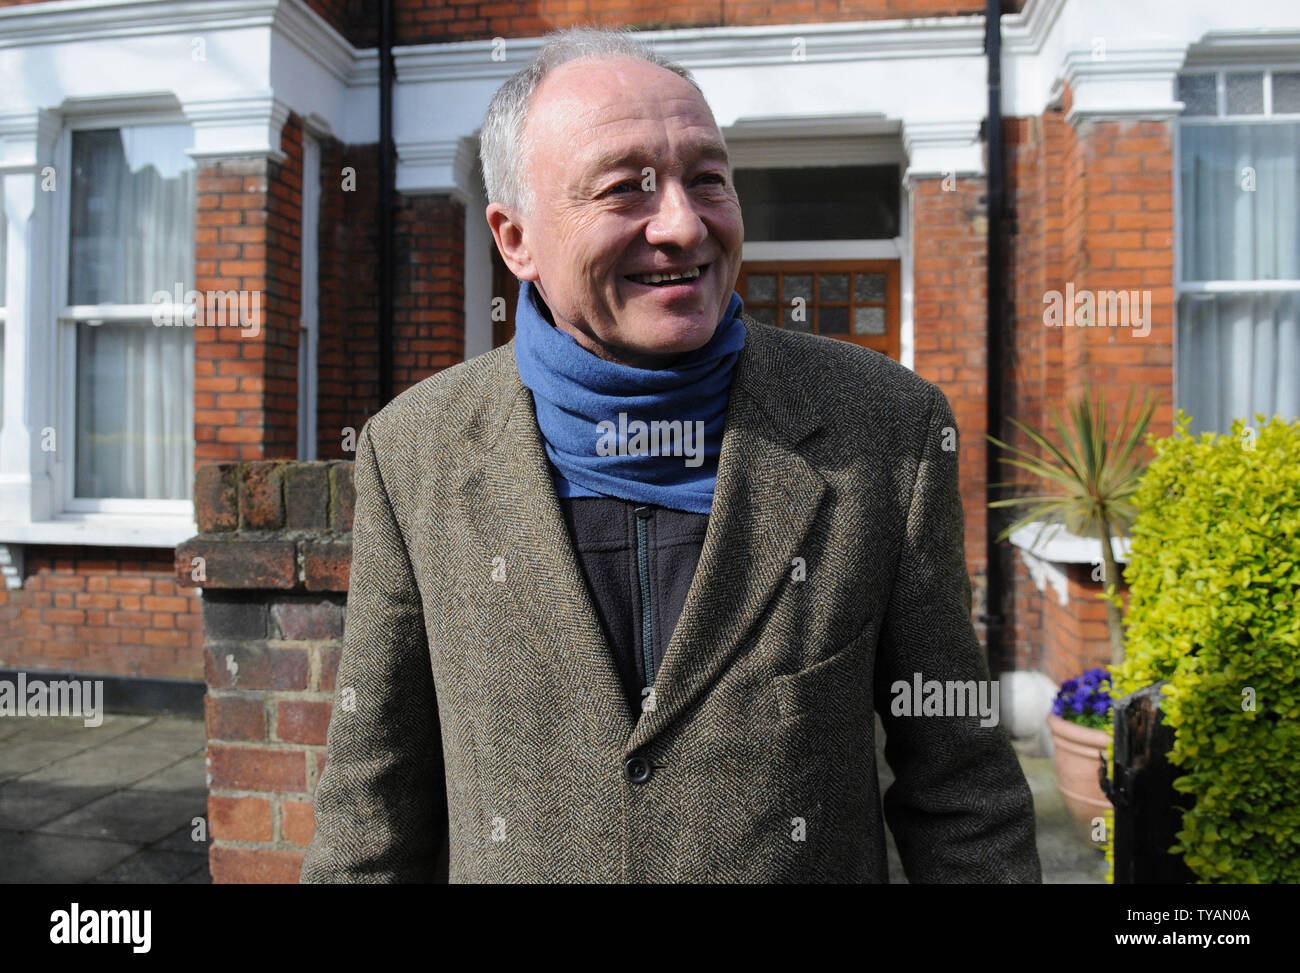 Former London Mayor Ken Livingstone leaves his house to collect his belongings from City Hall the day after losing to Conservative Candidate Boris Johnson in London on May 3, 2008. (UPI Photo/Hugo Philpott) Stock Photo